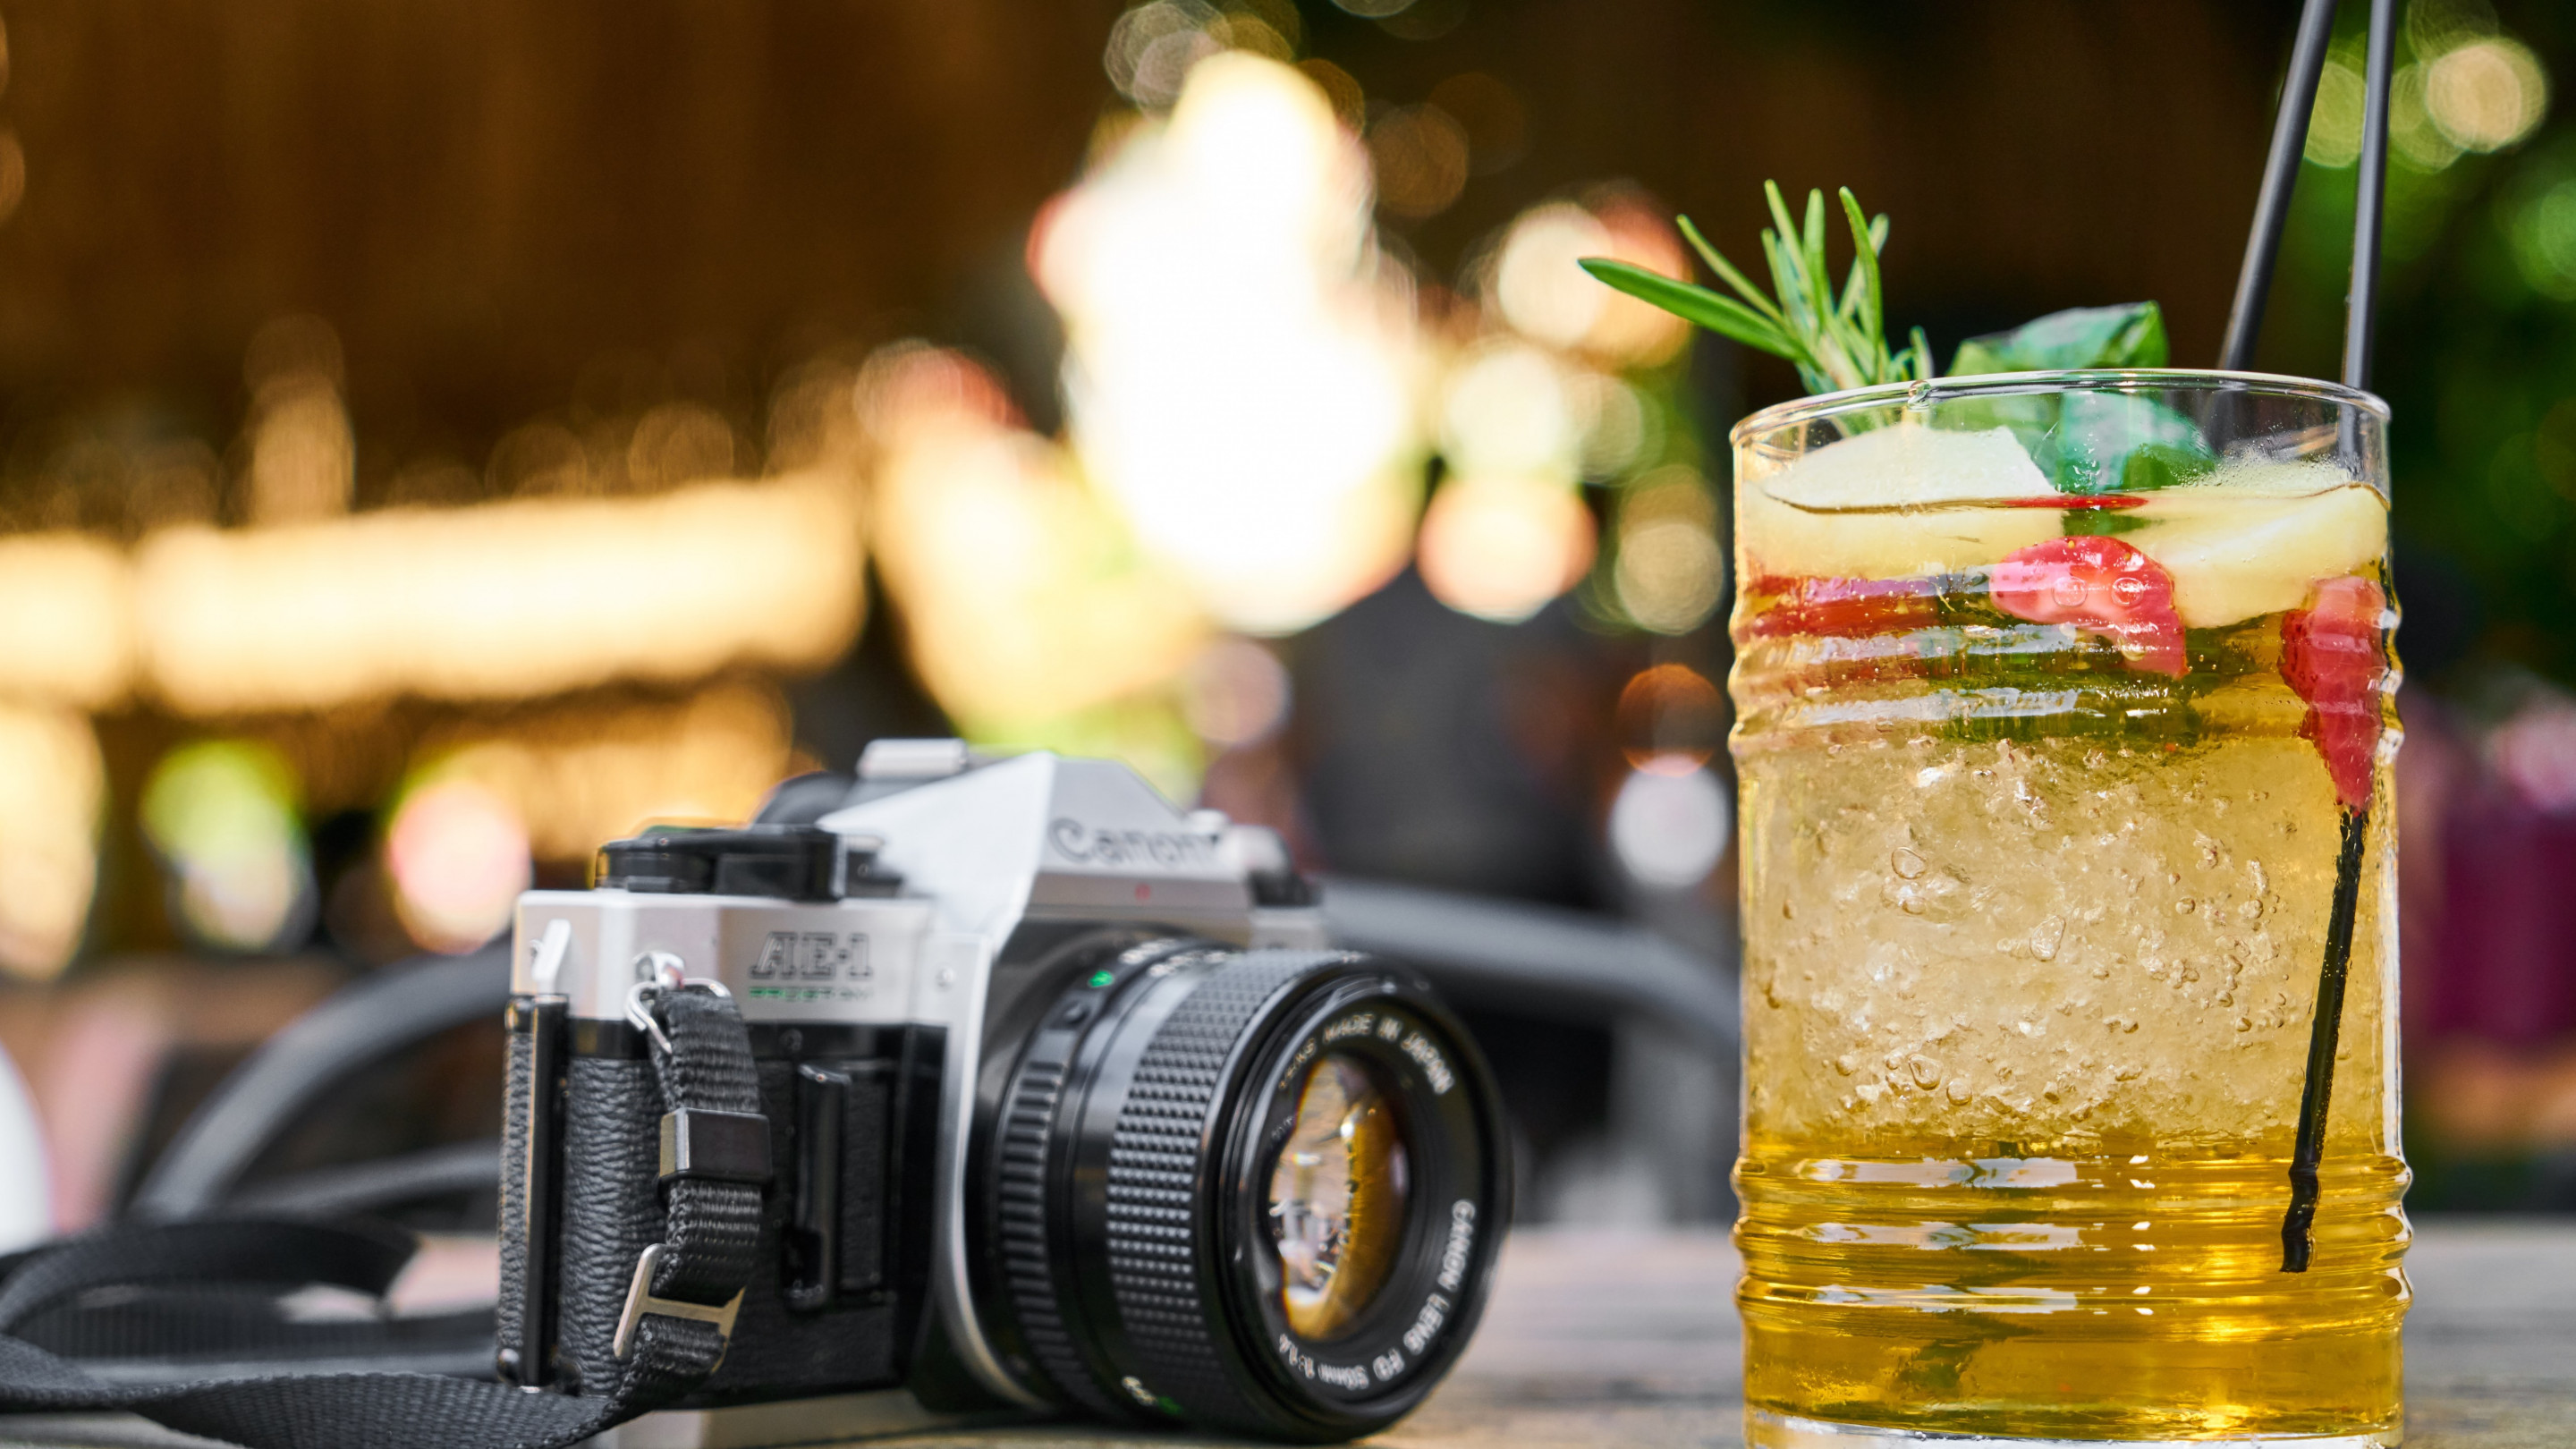 Retro photo camera and one cold drink wallpaper 2880x1620